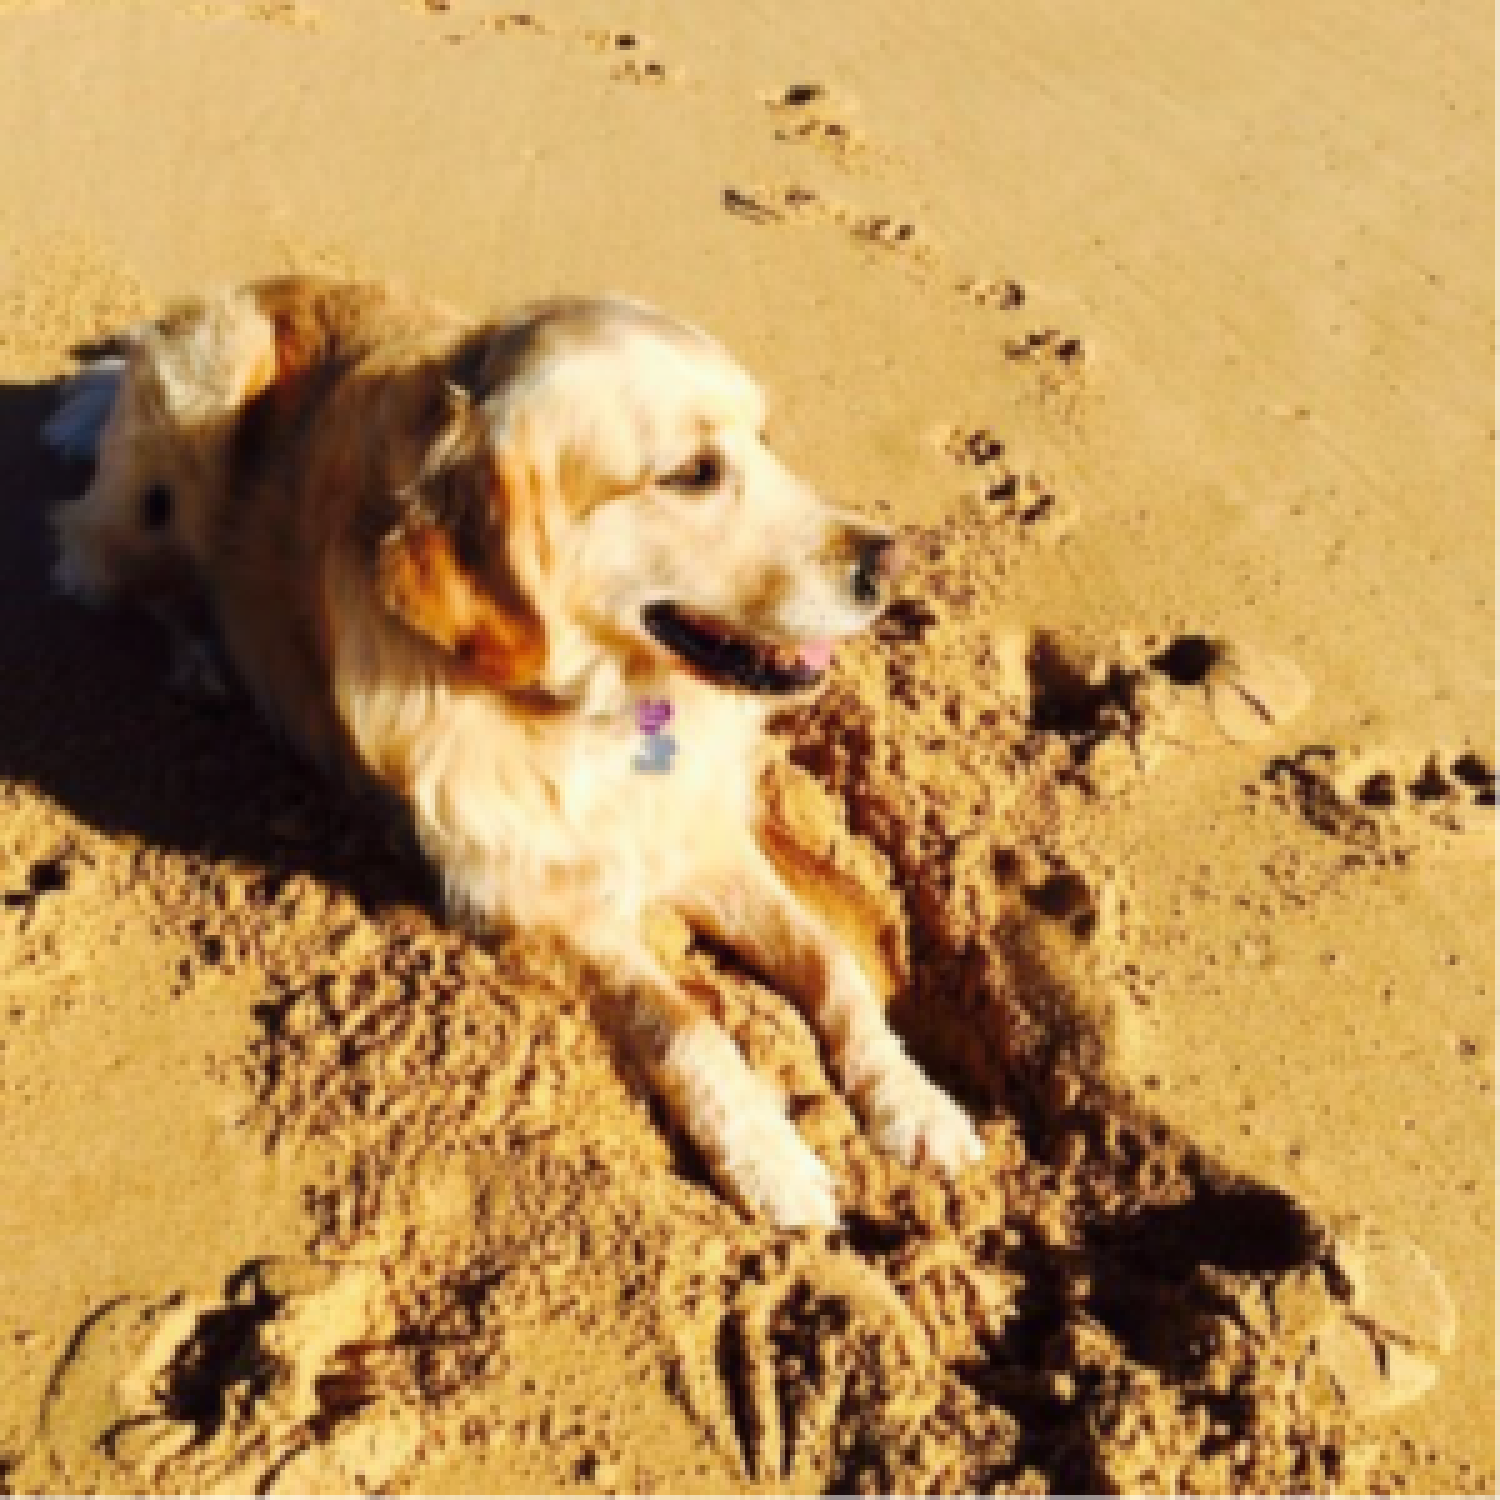 Golden retriever looking happy, sitting on the sand at the beach